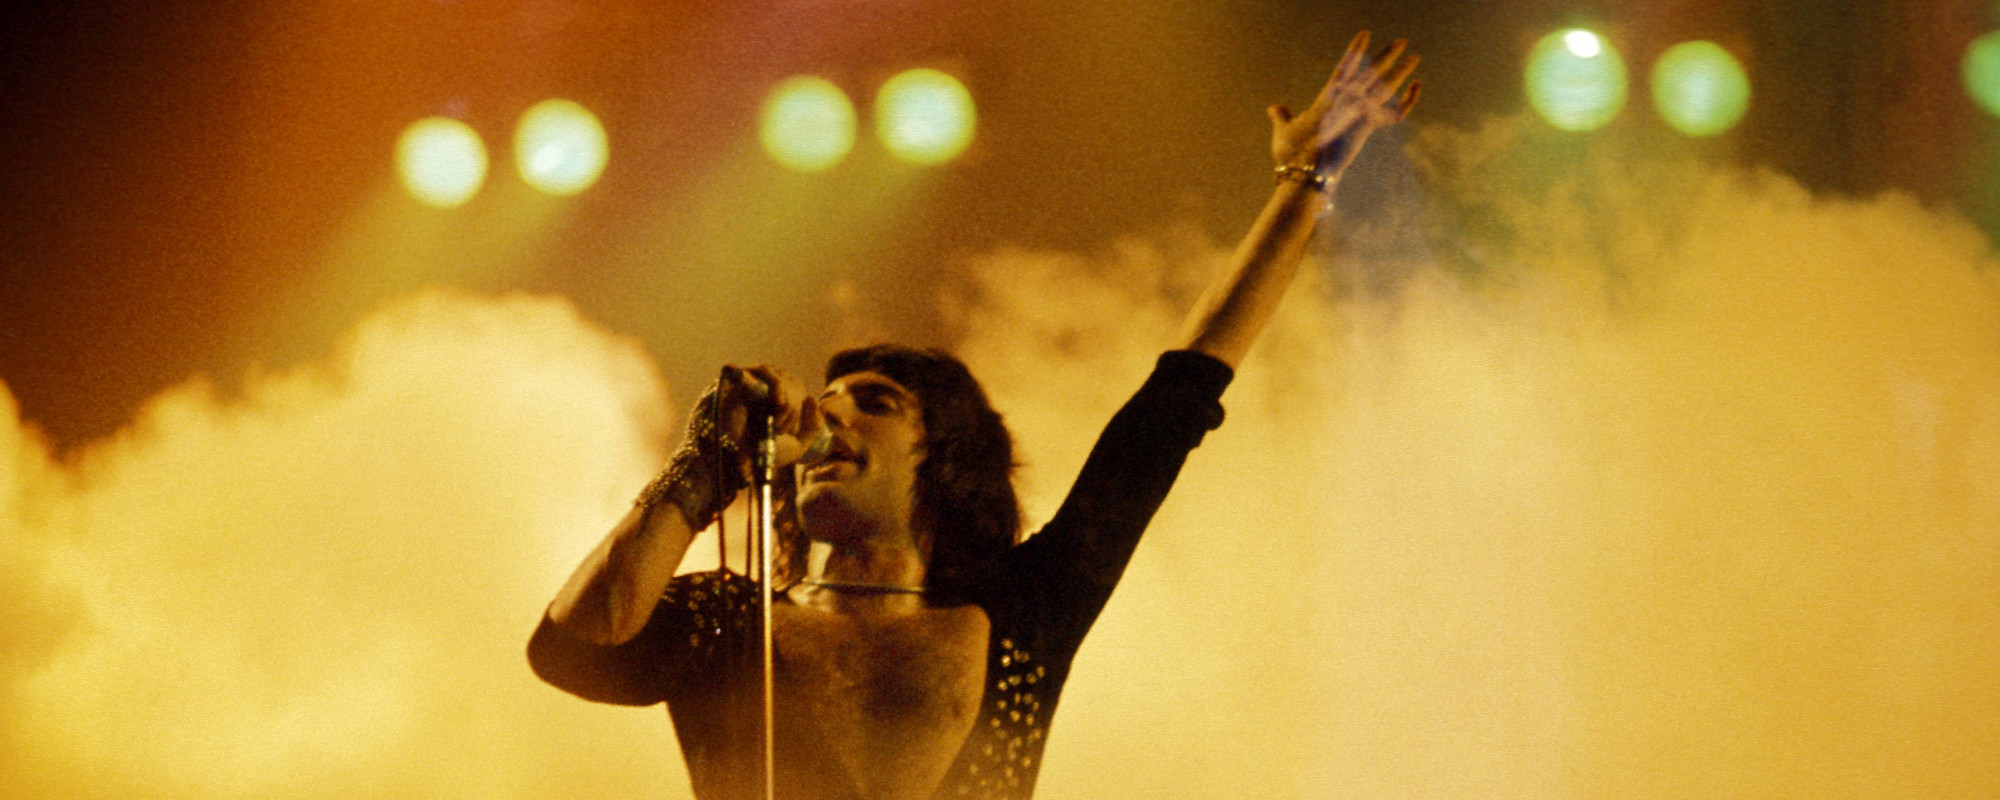 Three Stages of Life: The Meaning Behind “We Will Rock You” by Queen